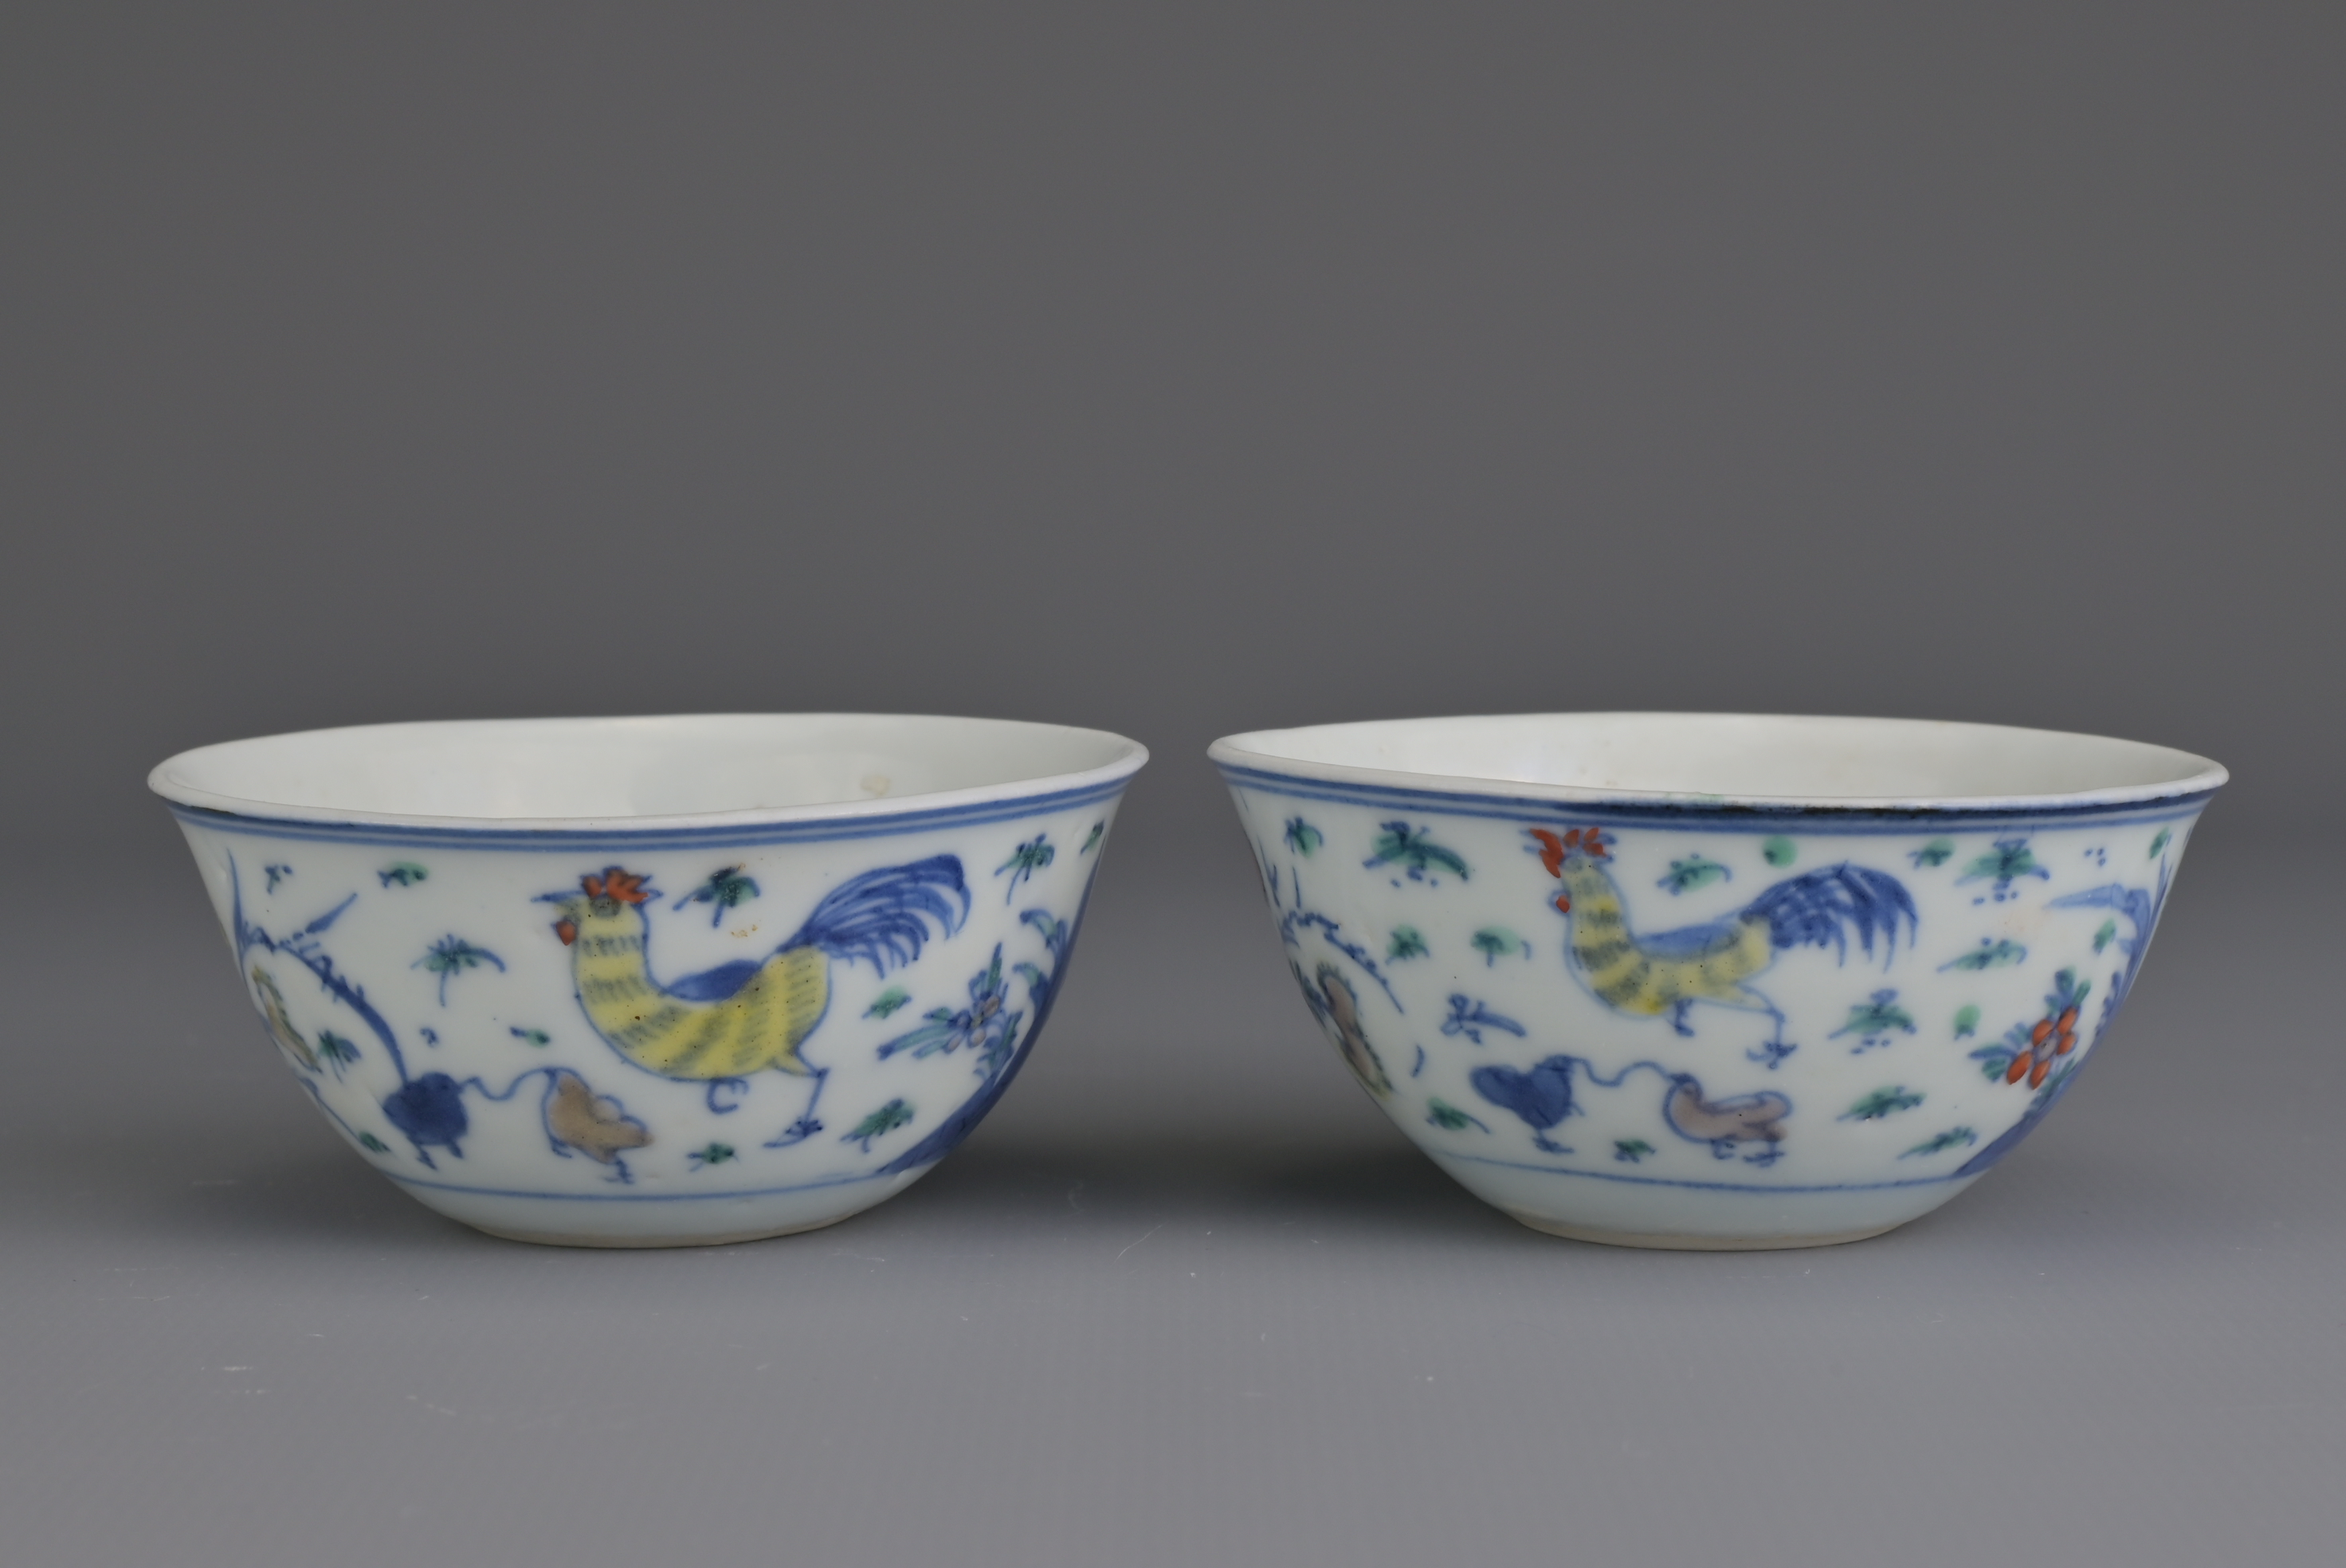 PAIR OF CHINESE DOUCAI PORCELAIN ‘CHICKEN’ CUPS, KANGXI PERIOD, 18th CENTURY - Image 2 of 8